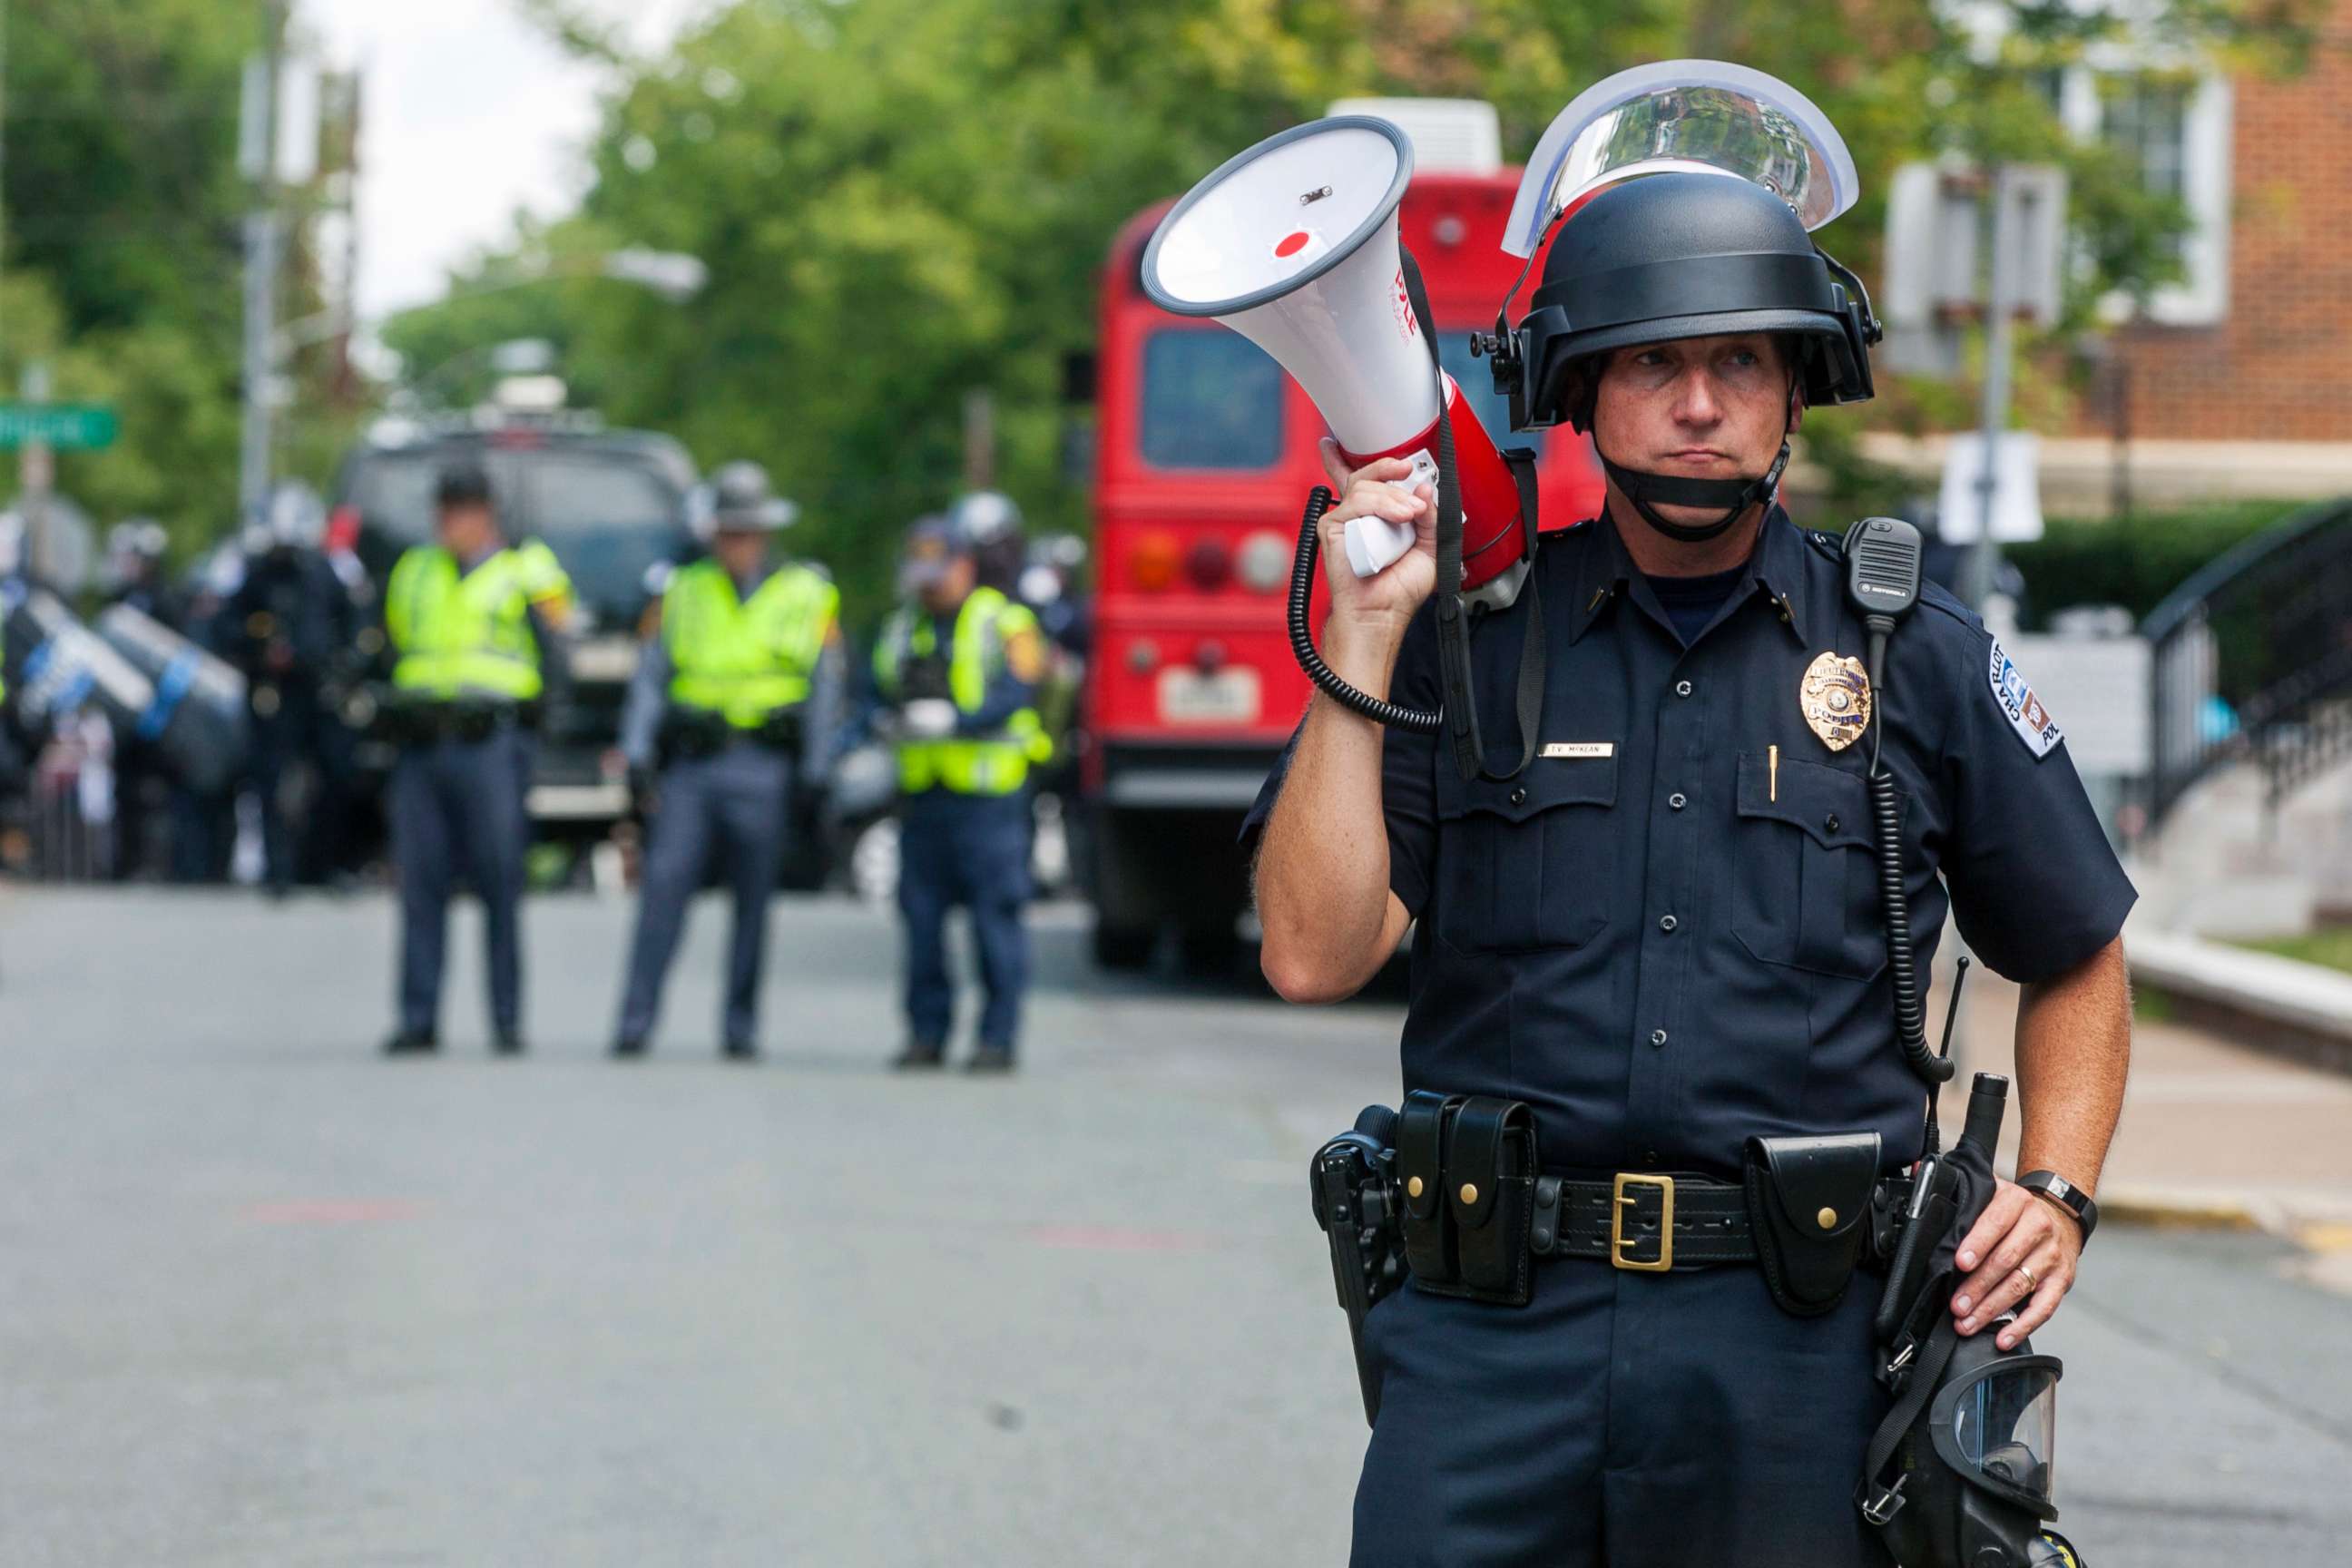 PHOTO: A police officer stands in the middle of the street after declaring the protest an unlawful assembly during a white nationalist rally, Aug. 12, 2017, in Charlottesville, Va.